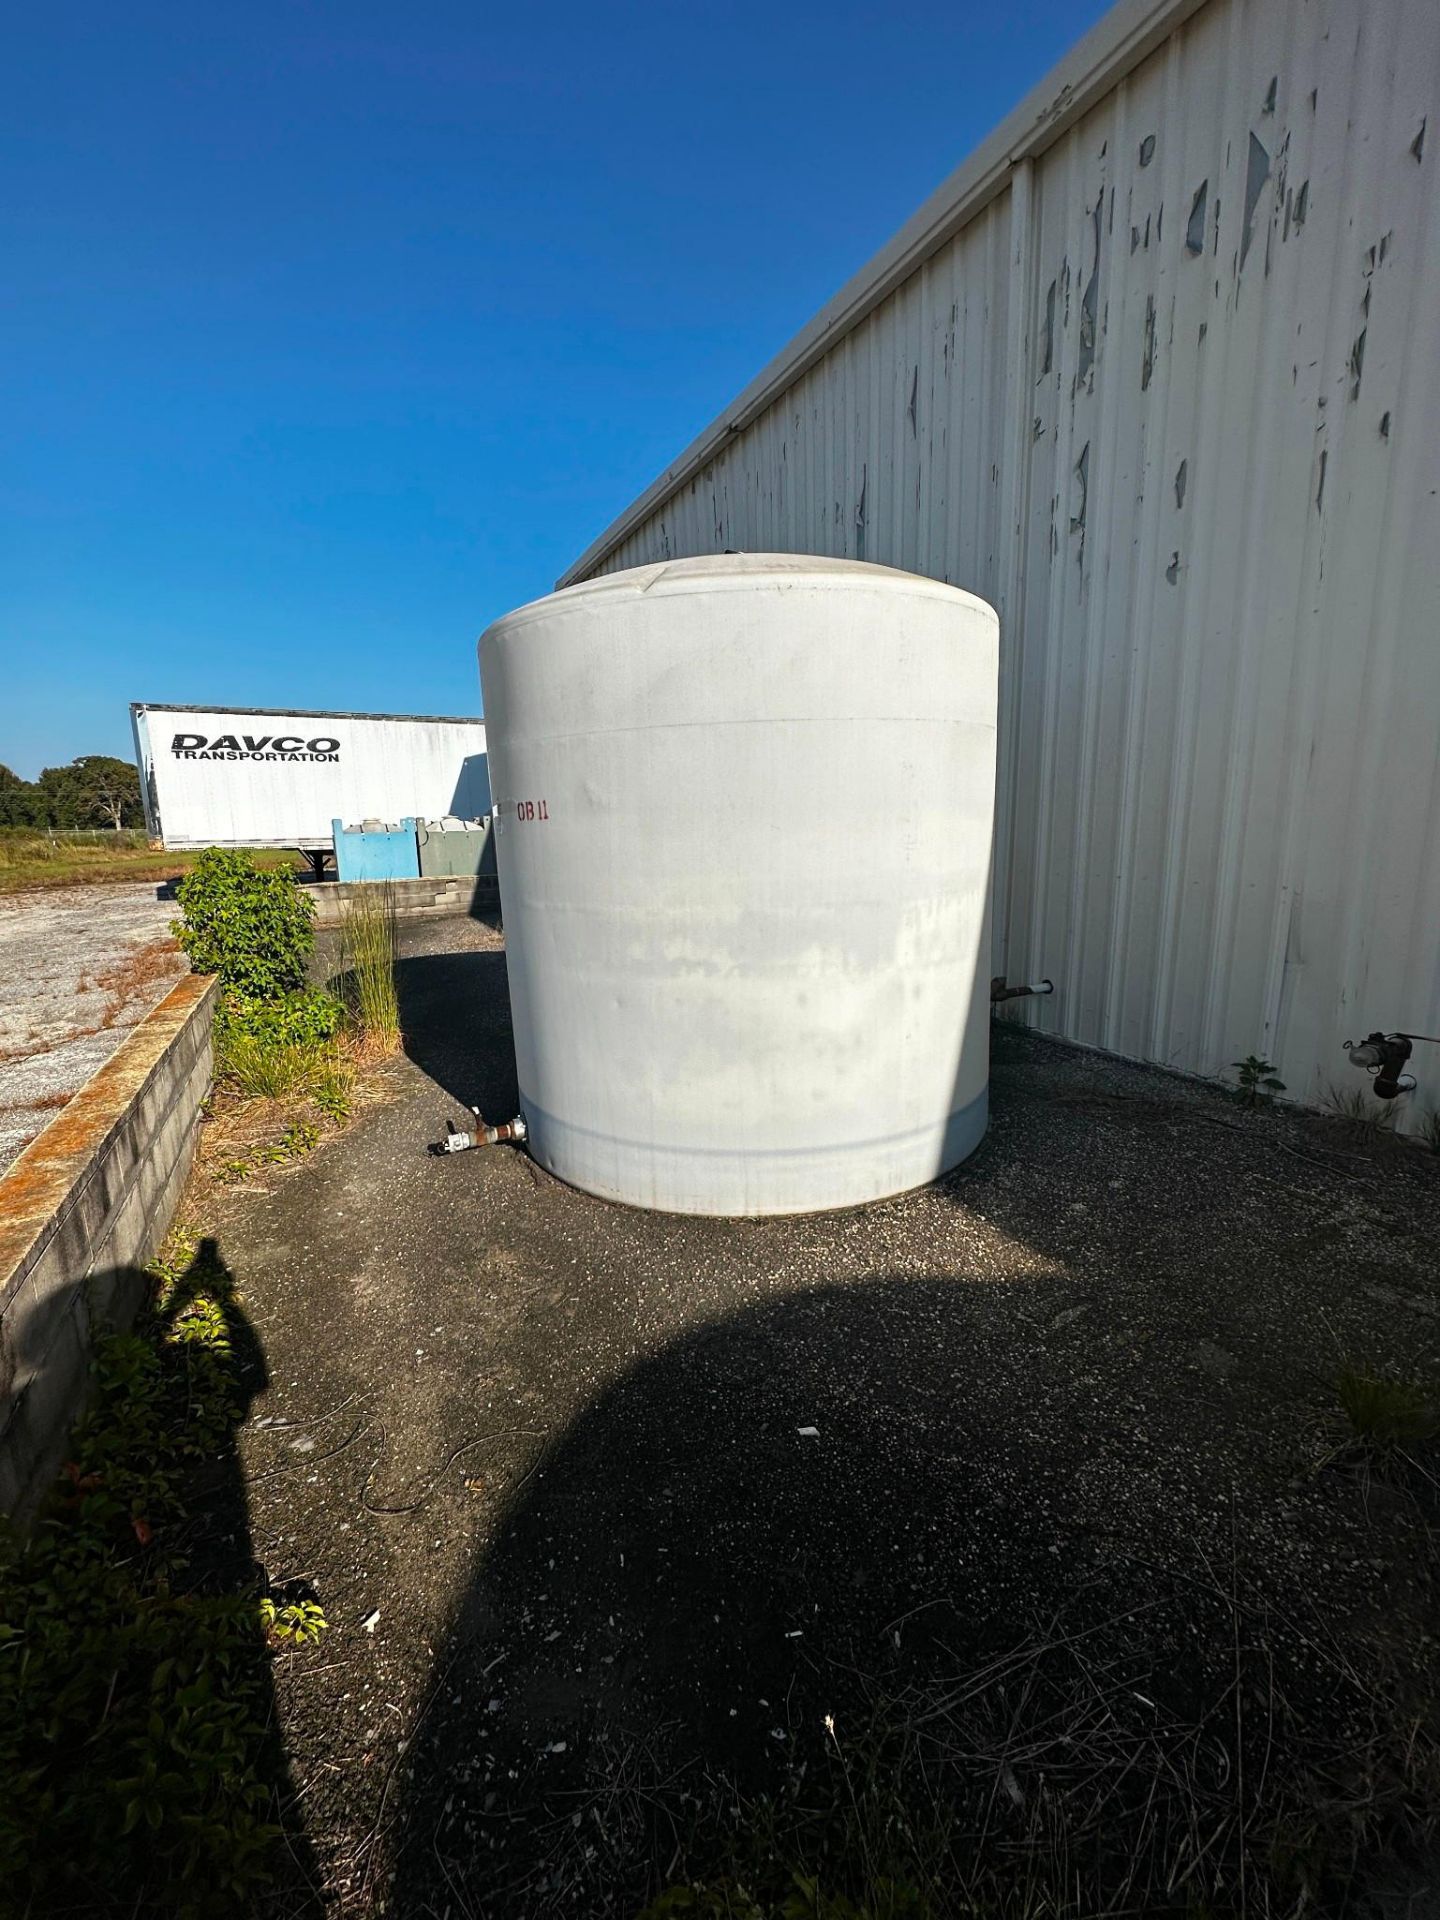 2800 GALLON POLY TANK 8'DIA X 92" ST. SIDE 3" DISCHARGE.